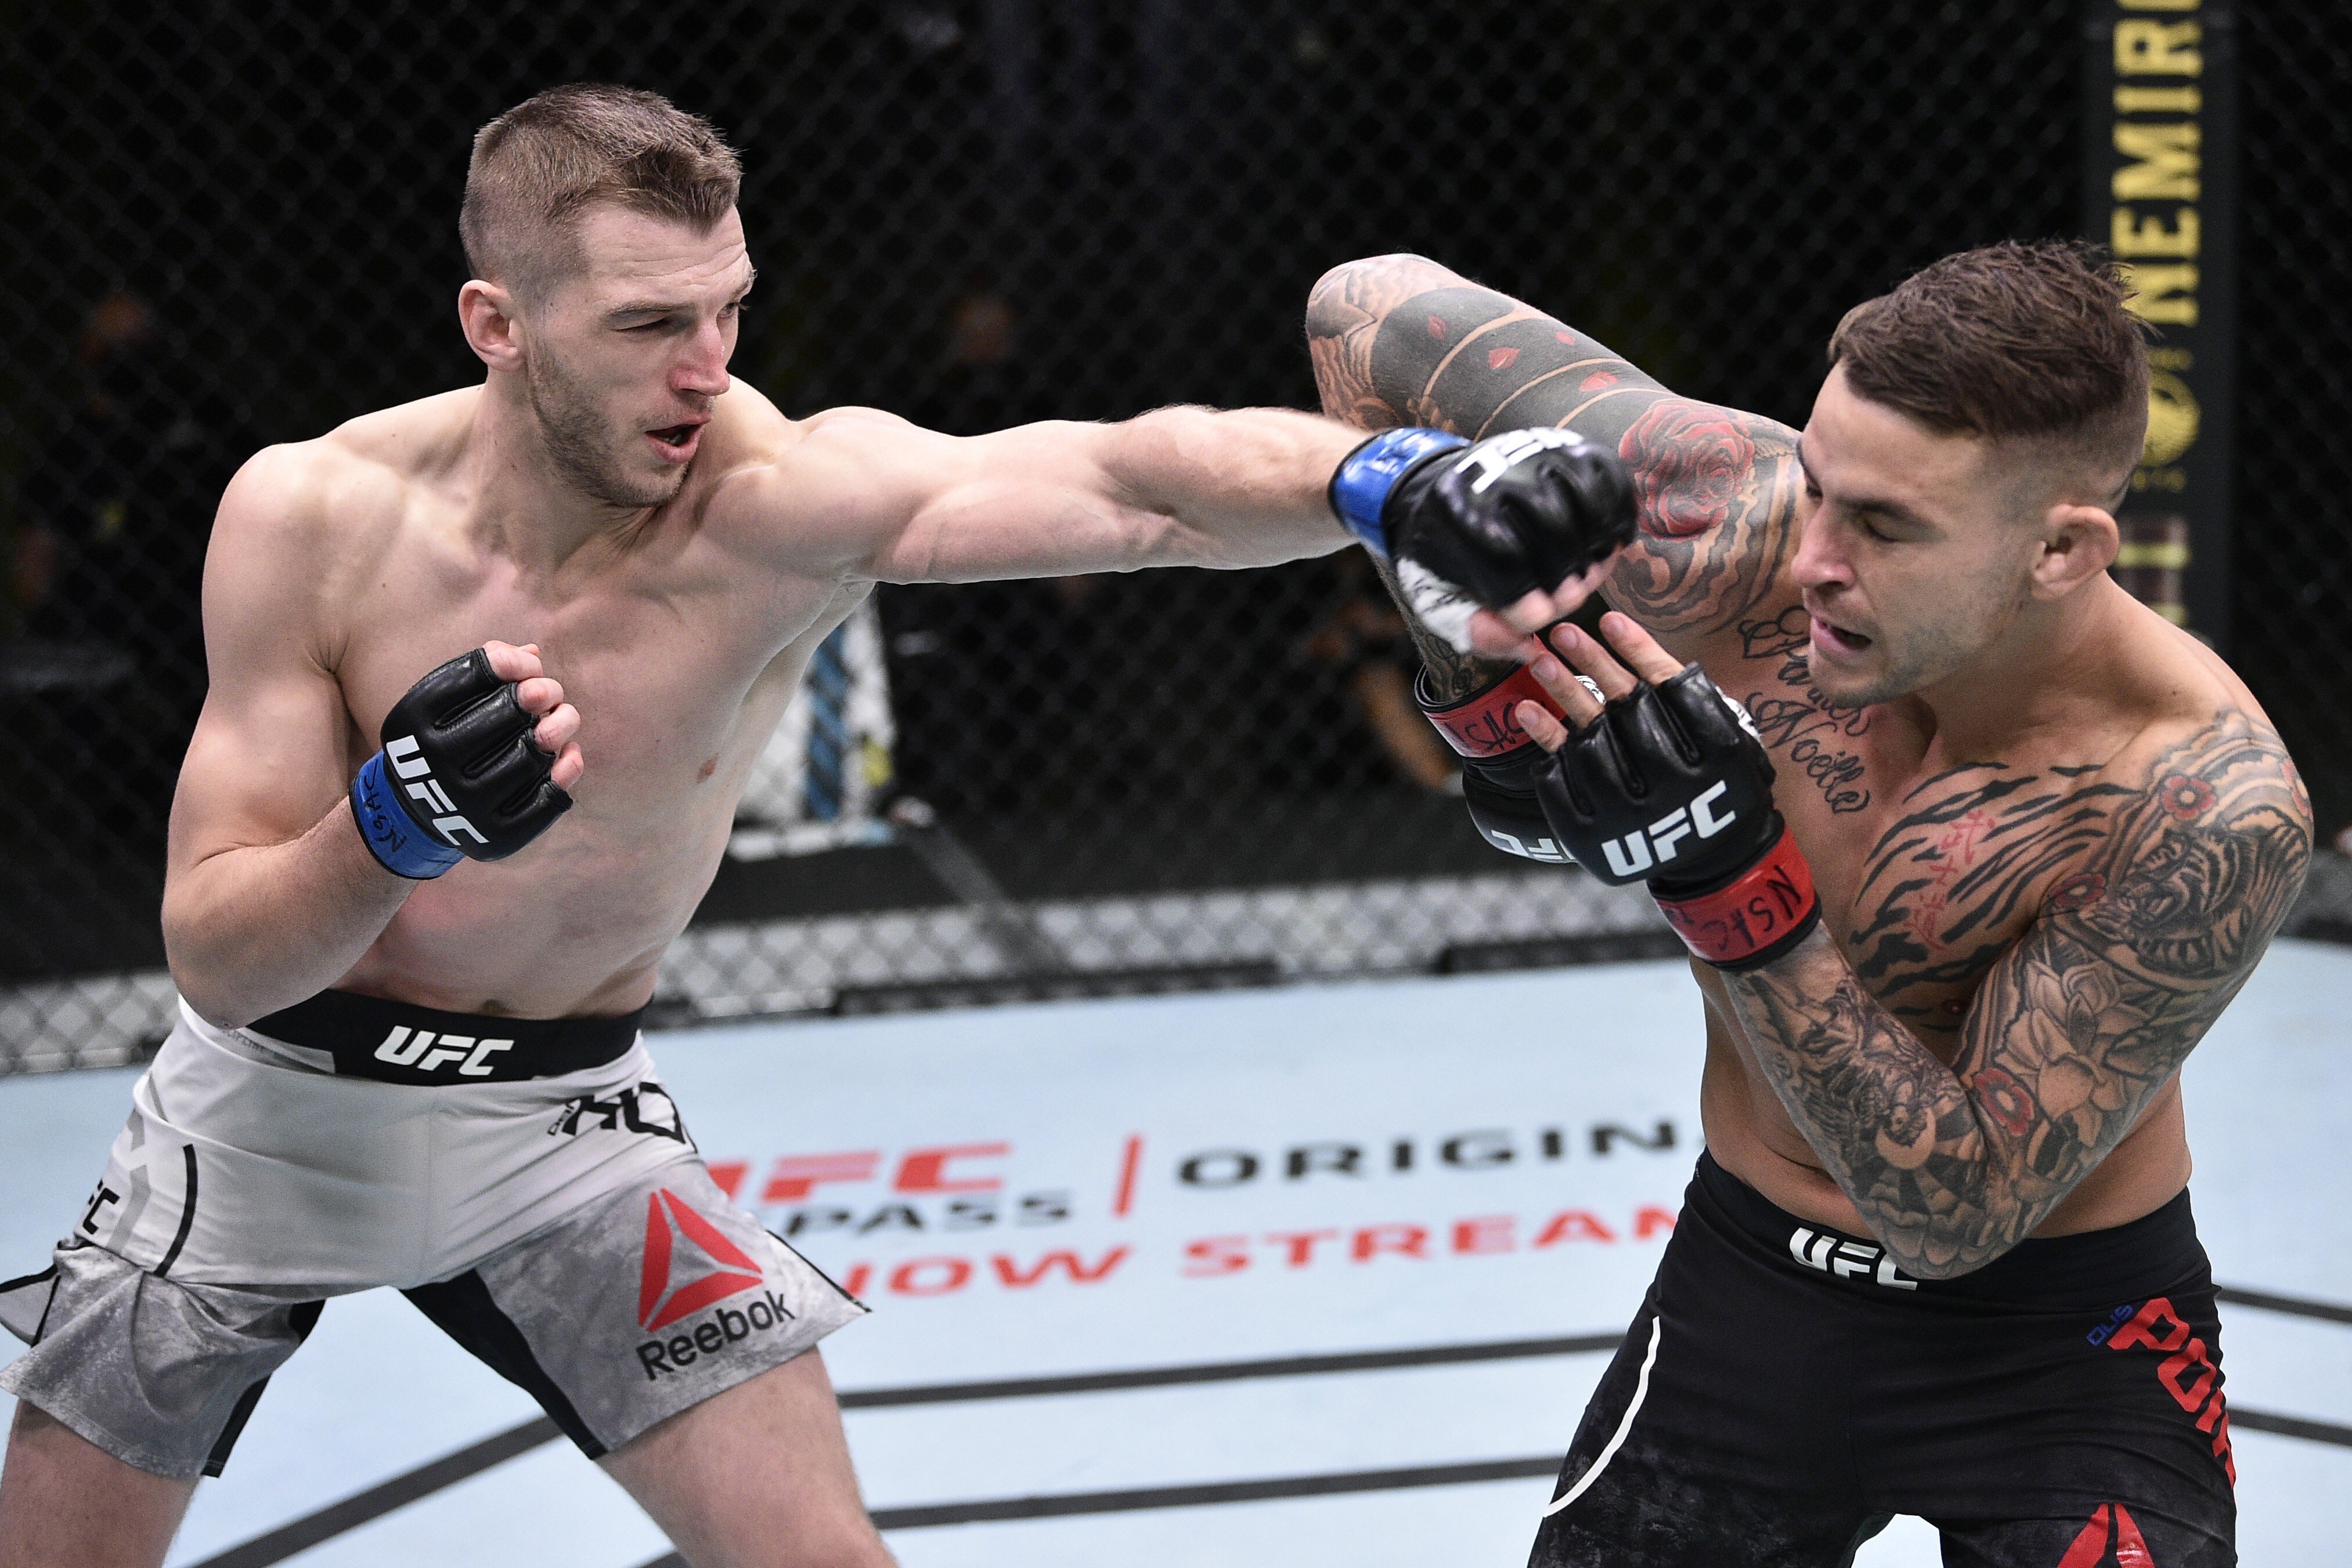 Dan Hooker punches Dustin Poirier during UFC Fight Night at the UFC Apex. Photo: Chris Unger/Zuffa LLC via USA TODAY Sports